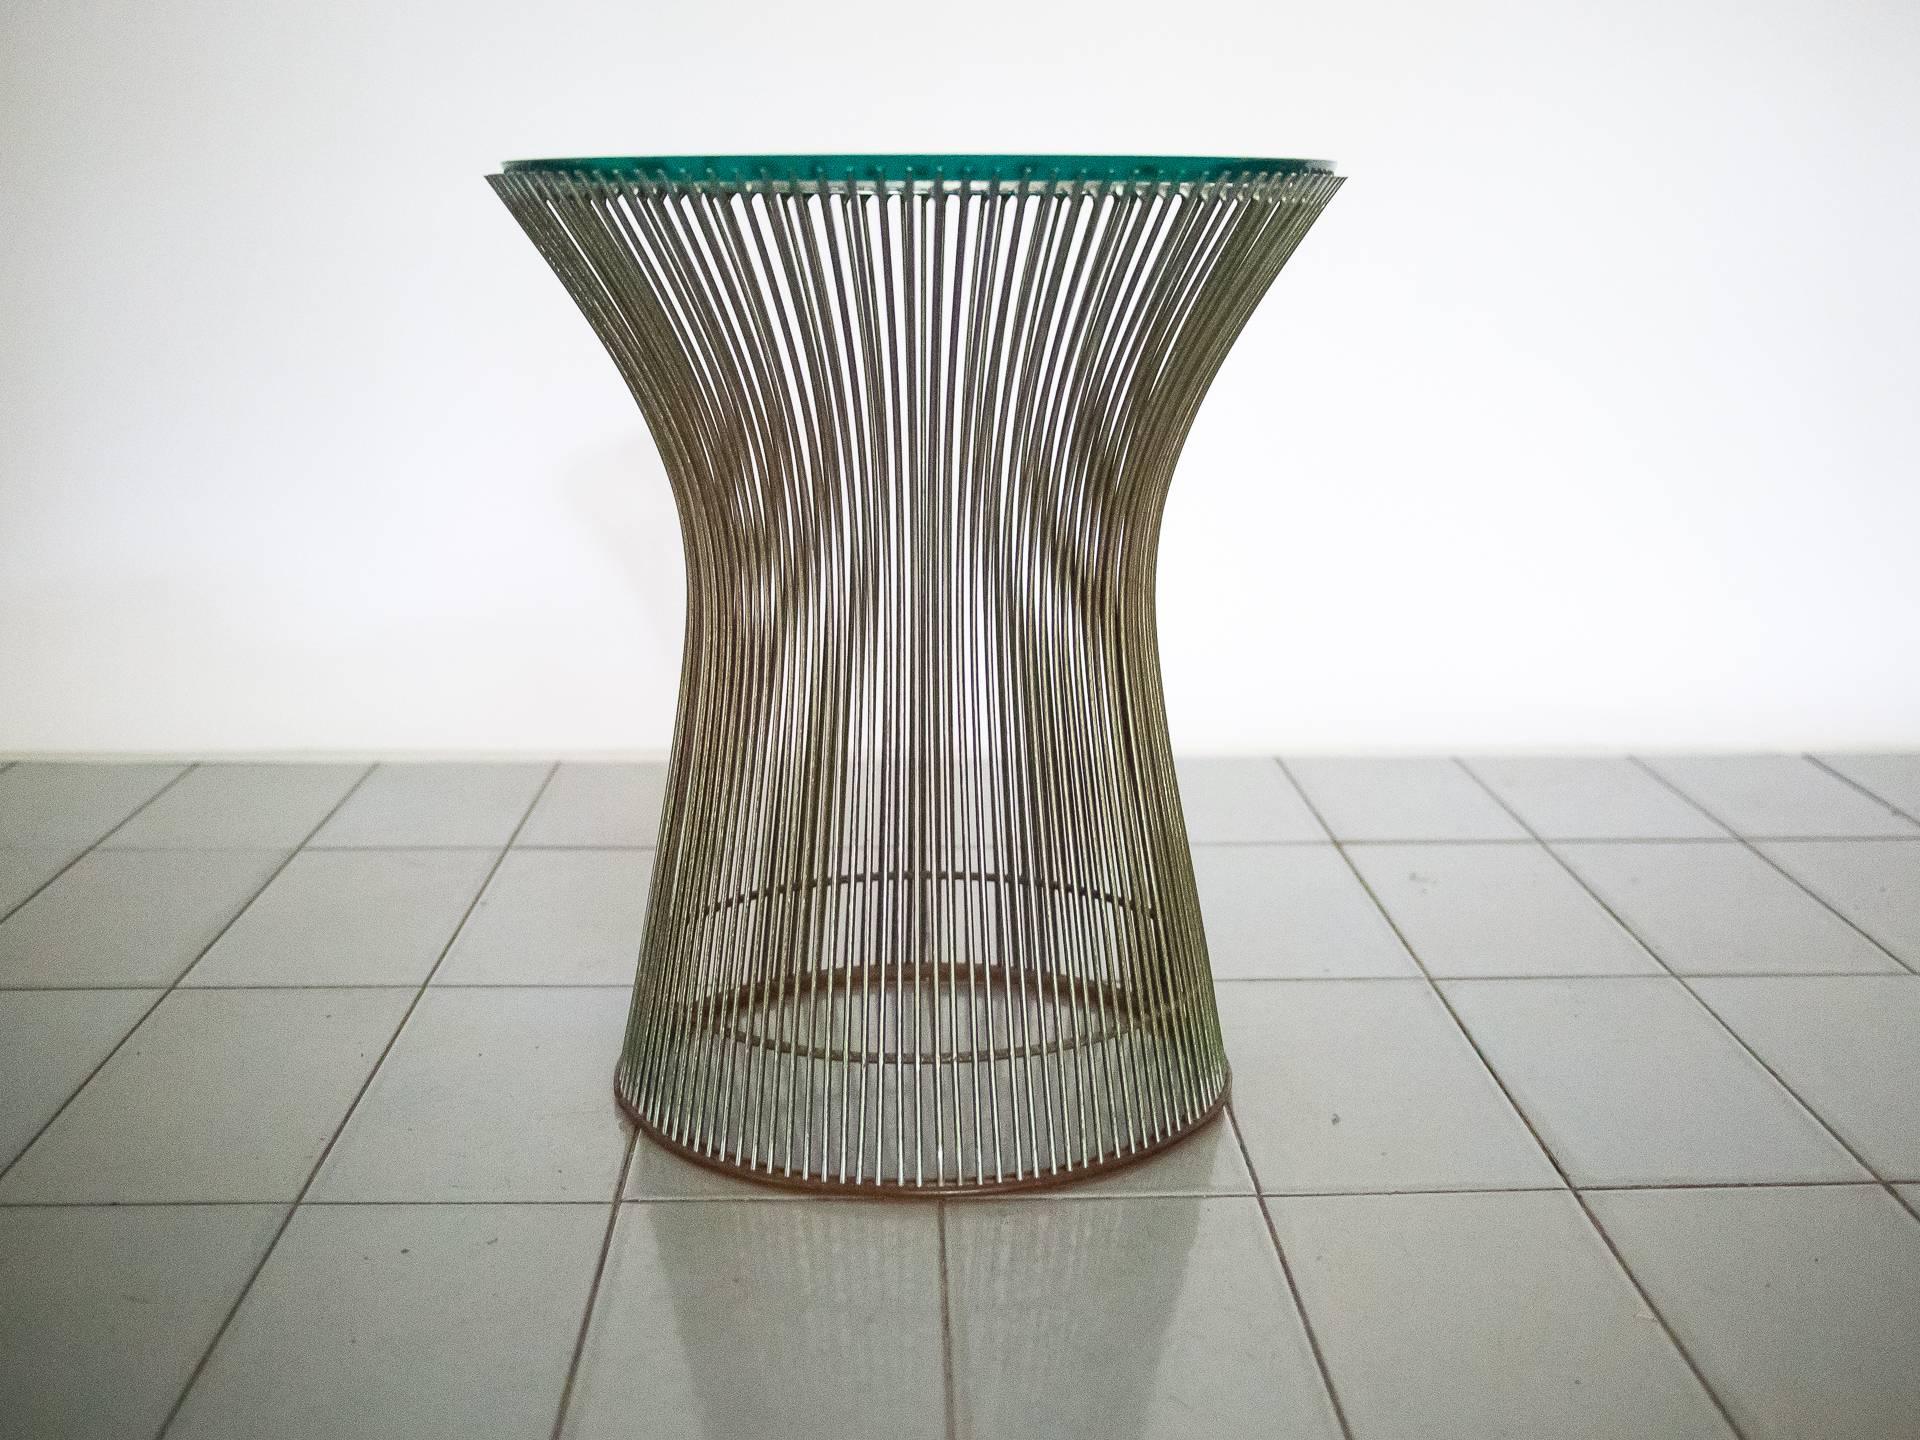 Classic Platner side table, produced in Brazil by Forma S/A under license of Knoll Inc, circa 1960.

Original glass top has a small chip, iron is in great shape and shows age. Can be polished and have the glass substituted, please get in touch